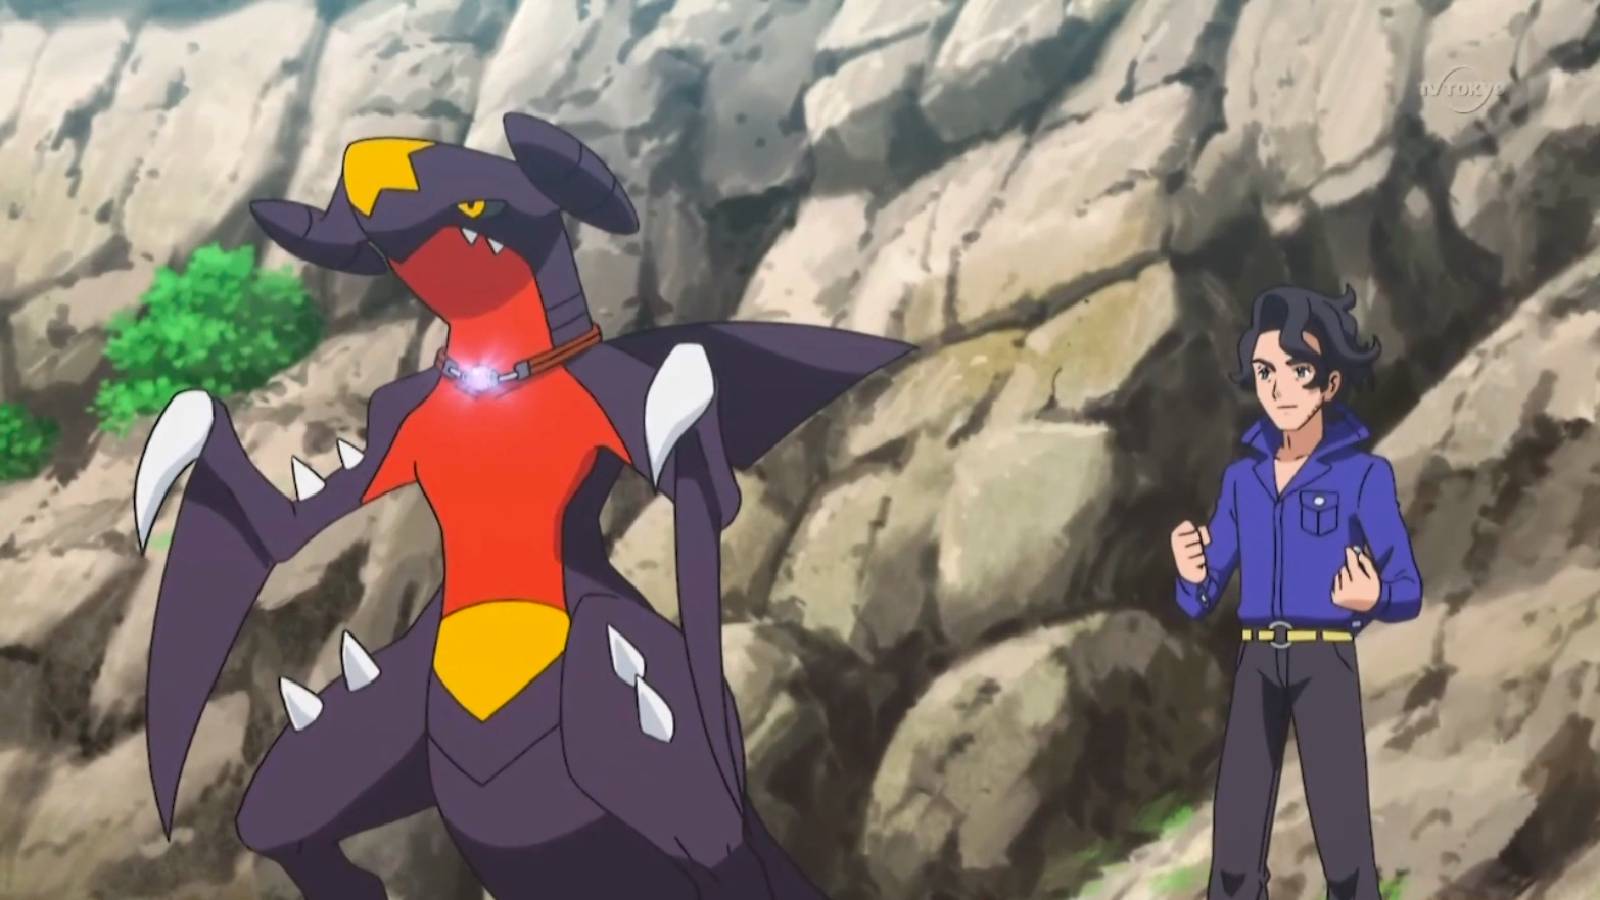 A screenshot from the Pokemon anime shows a garchomp and its trainer